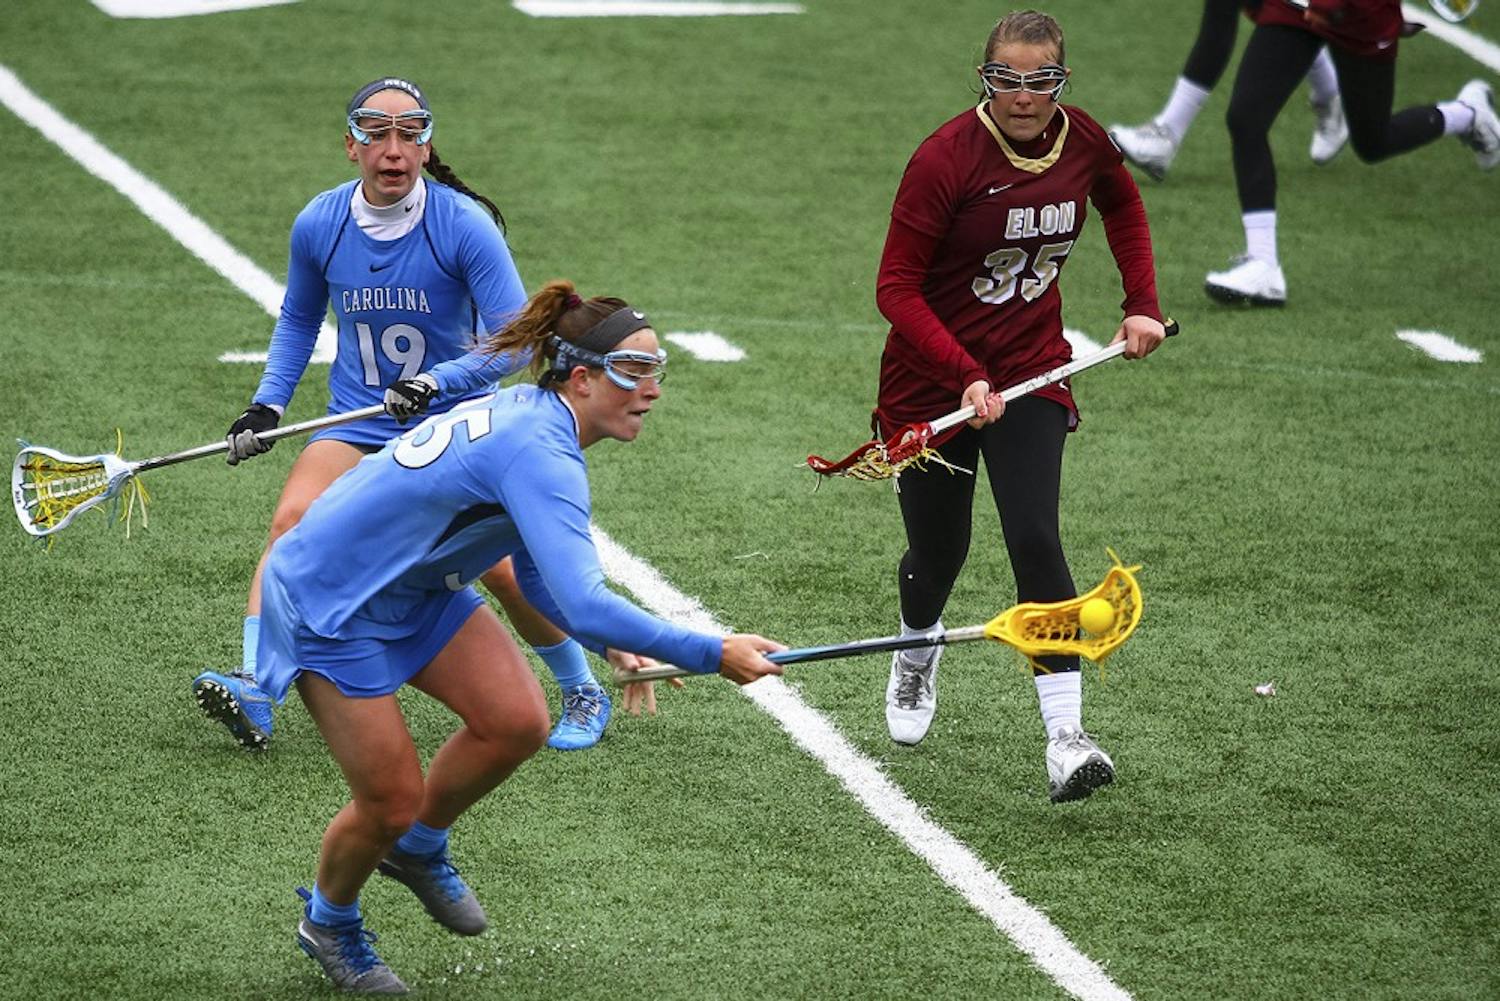 Senior defender Sarah Scott (19) chases the ball during the game against Elon on March 1. Scott had three fouls against Syracuse on Saturday, helping the Tar Heels defeat the Orange 15-8.